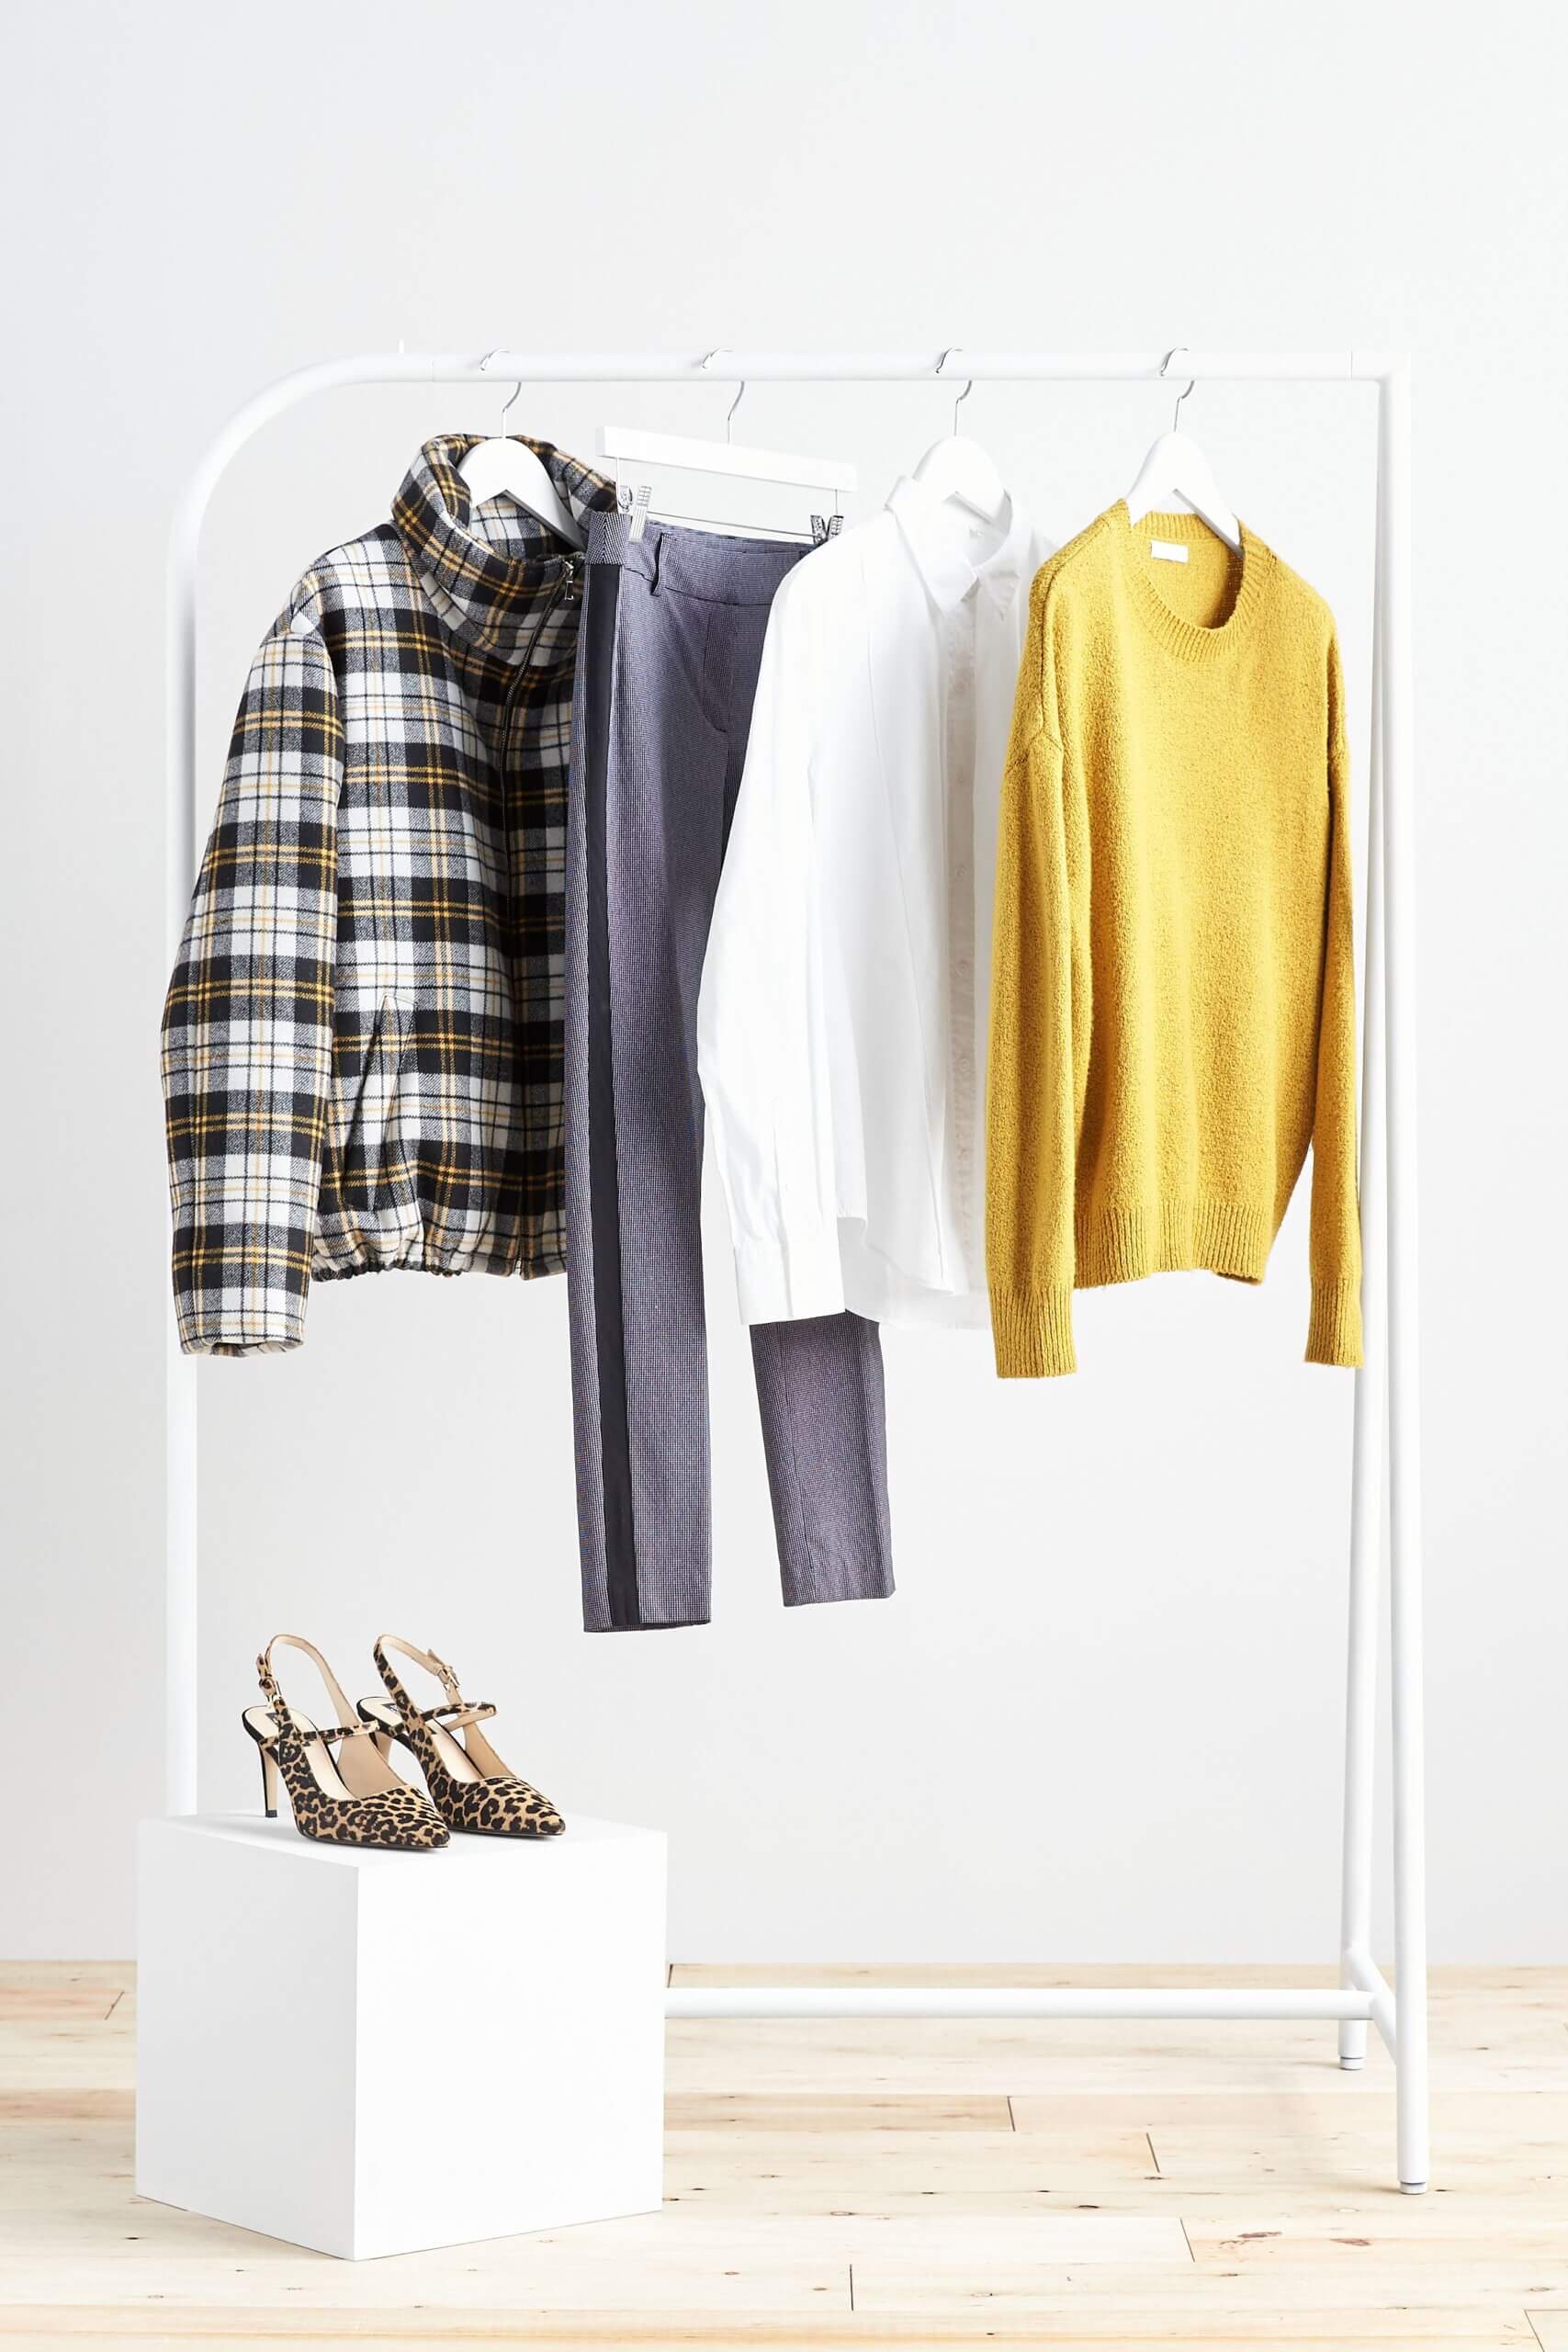 Stitch Fix Women's rack image featuring yellow sweater, white button-down shirt, blue pants and plaid puffer jacket hanging on white rack, next to animal-print heels. 